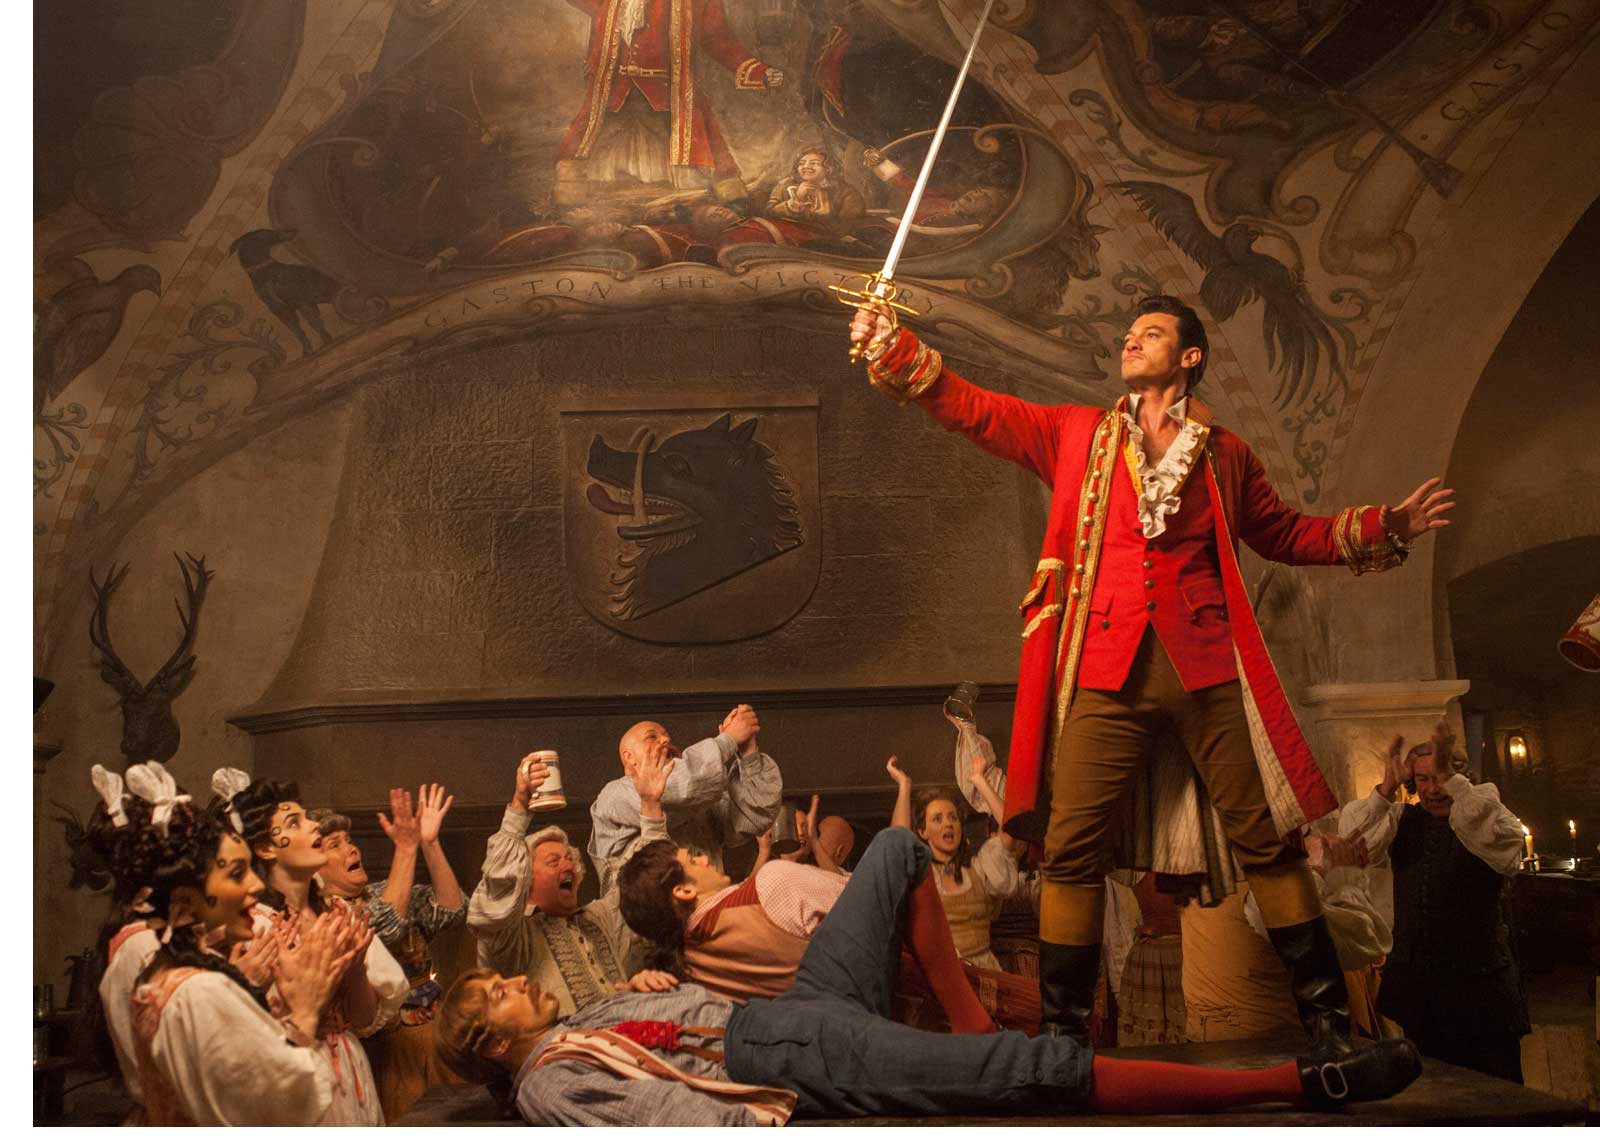 Gaston (Luke Evans) a handsome but arrogant brute, holds court in the village tavern in Disney's BEAUTY AND THE BEAST, directed by Bill Condon, a live-action adaptation of the studio's animated classic and a celebration of one of the most beloved stories ever told.